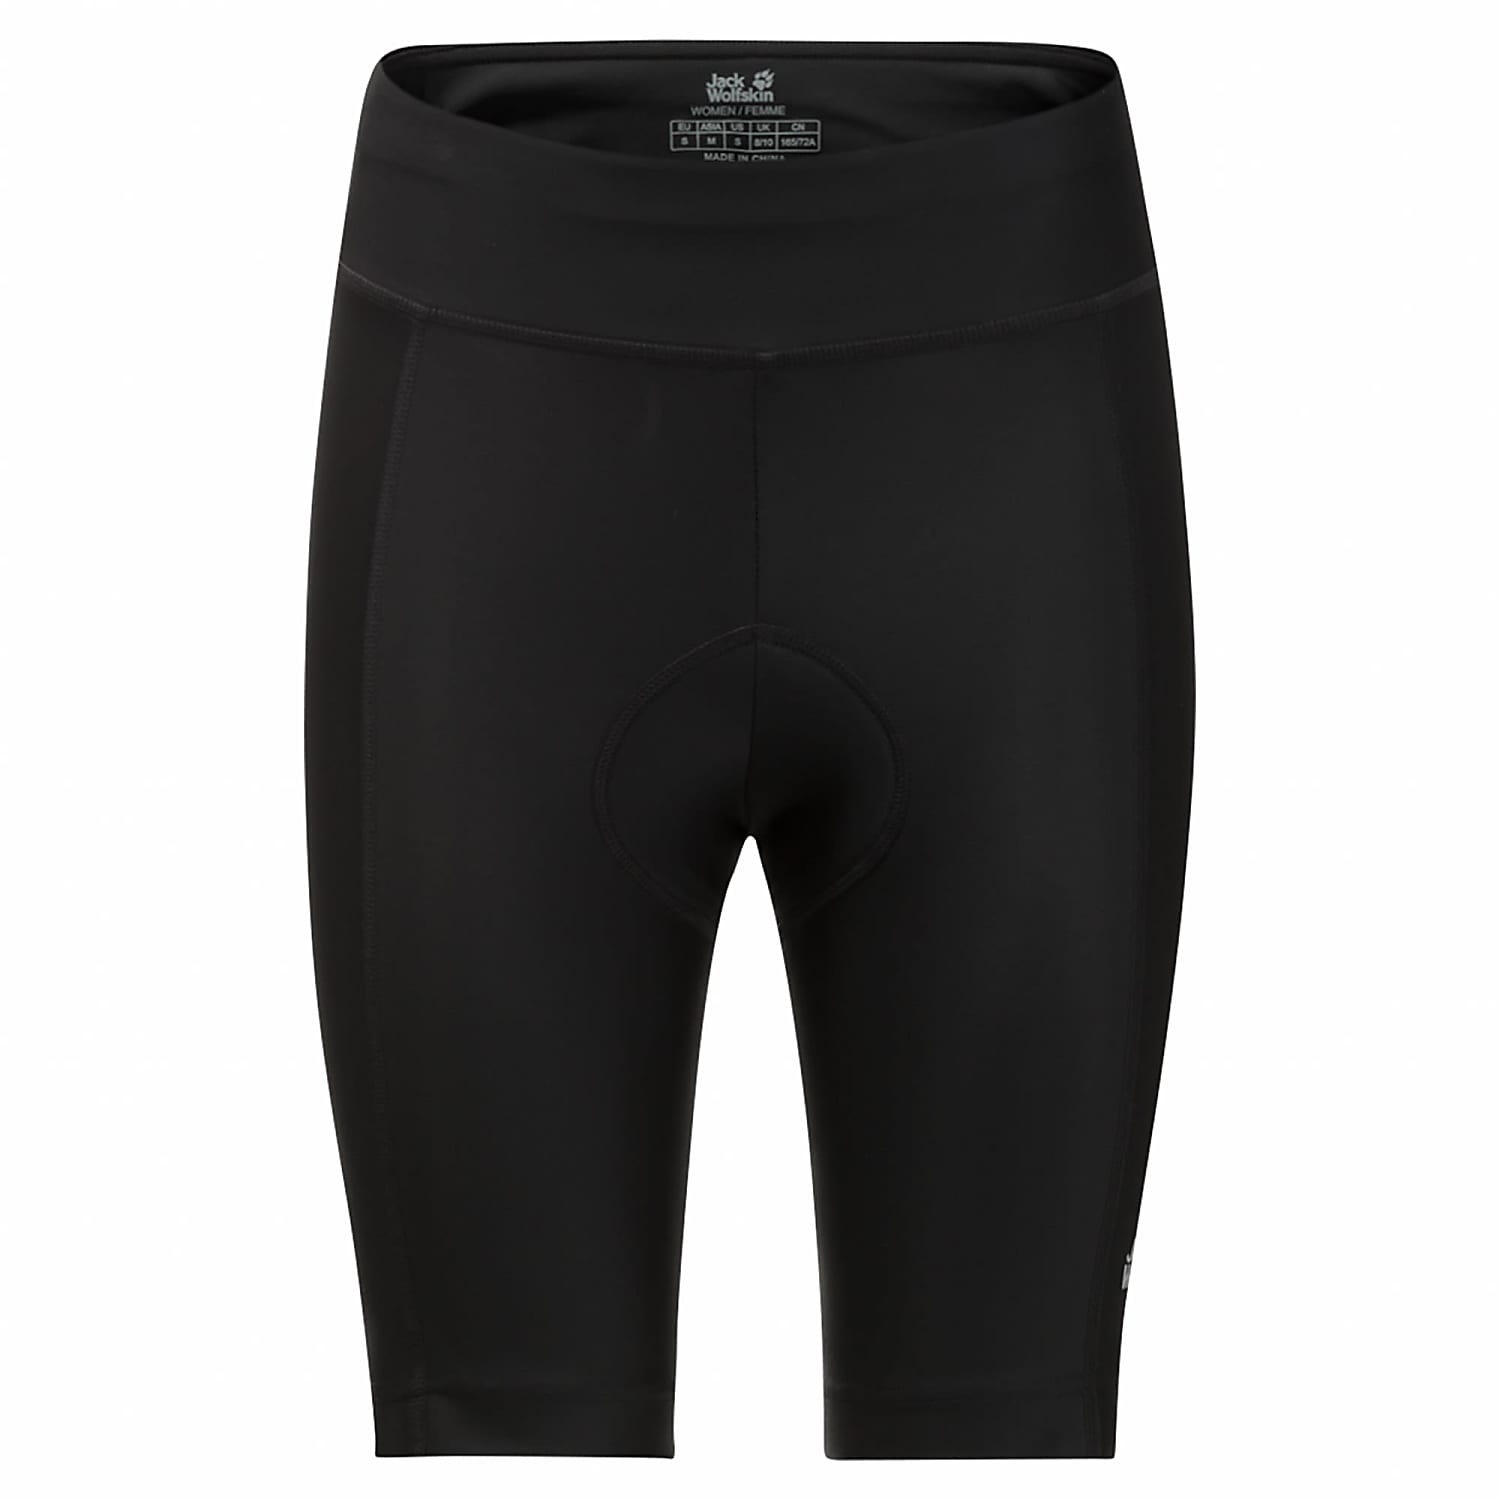 Black cheap W SHORTS, - PADDED TOURER shipping Jack Wolfskin and Fast